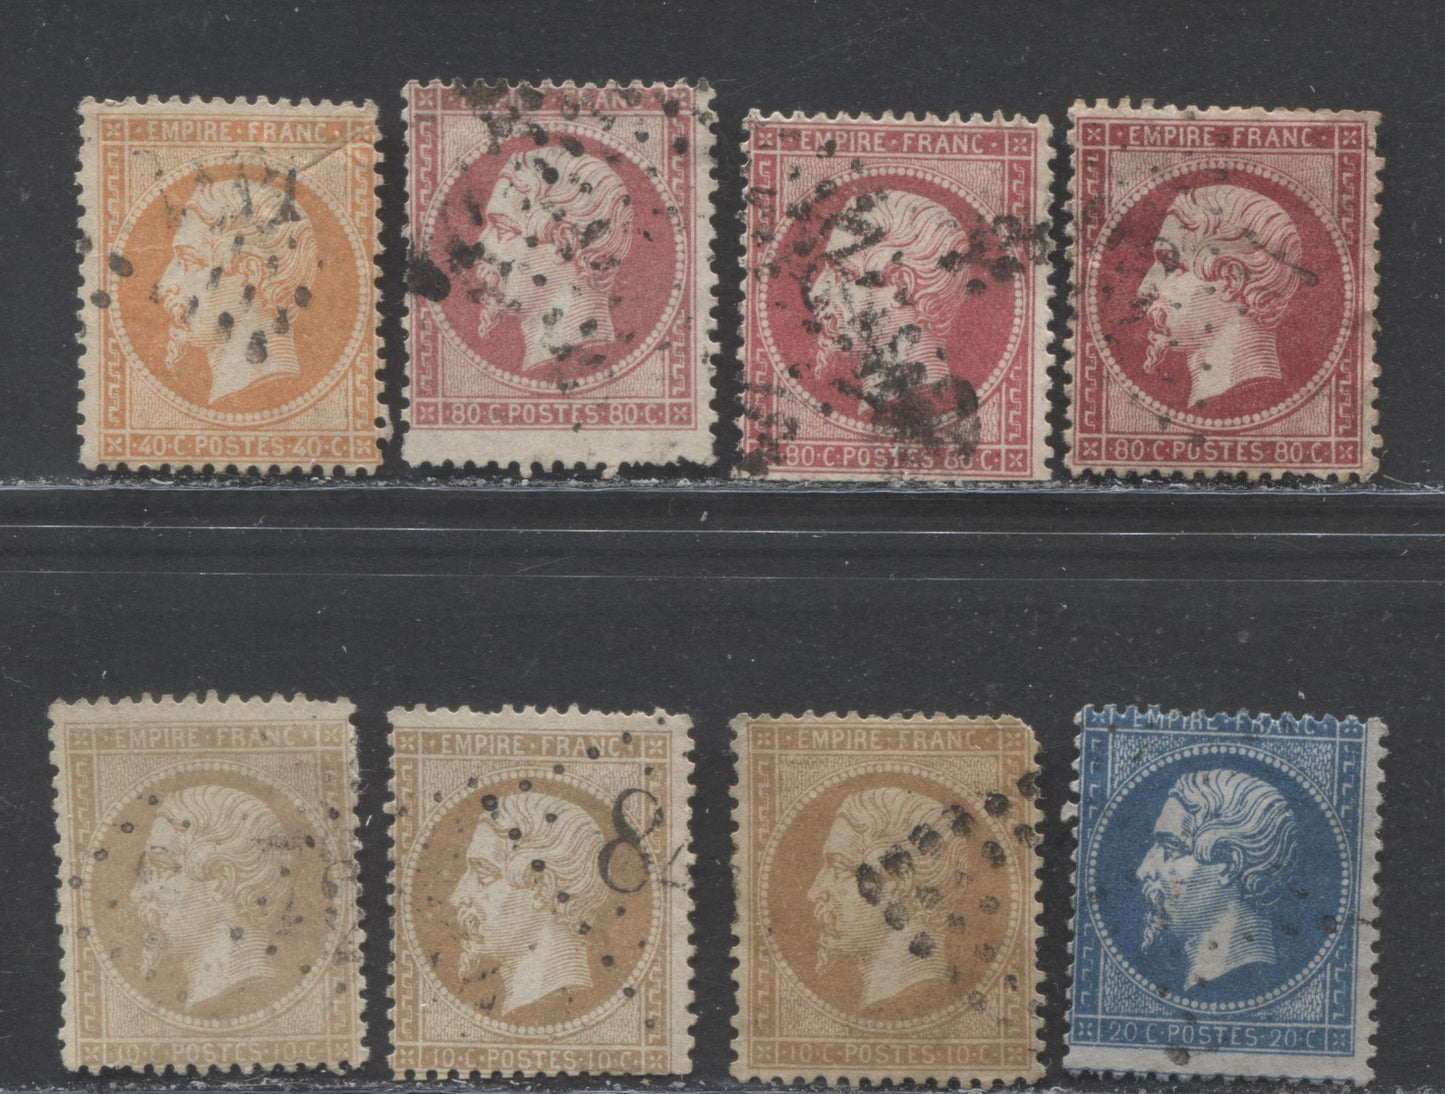 Lot 307 France SC#25-28b 1862-1871 Perforated Napoleon III Definitive Issue, A Good Used Range Of Singles, 2022 Scott Classic Cat. $149 USD, Net. Est. $18, Click on Listing to See ALL Pictures